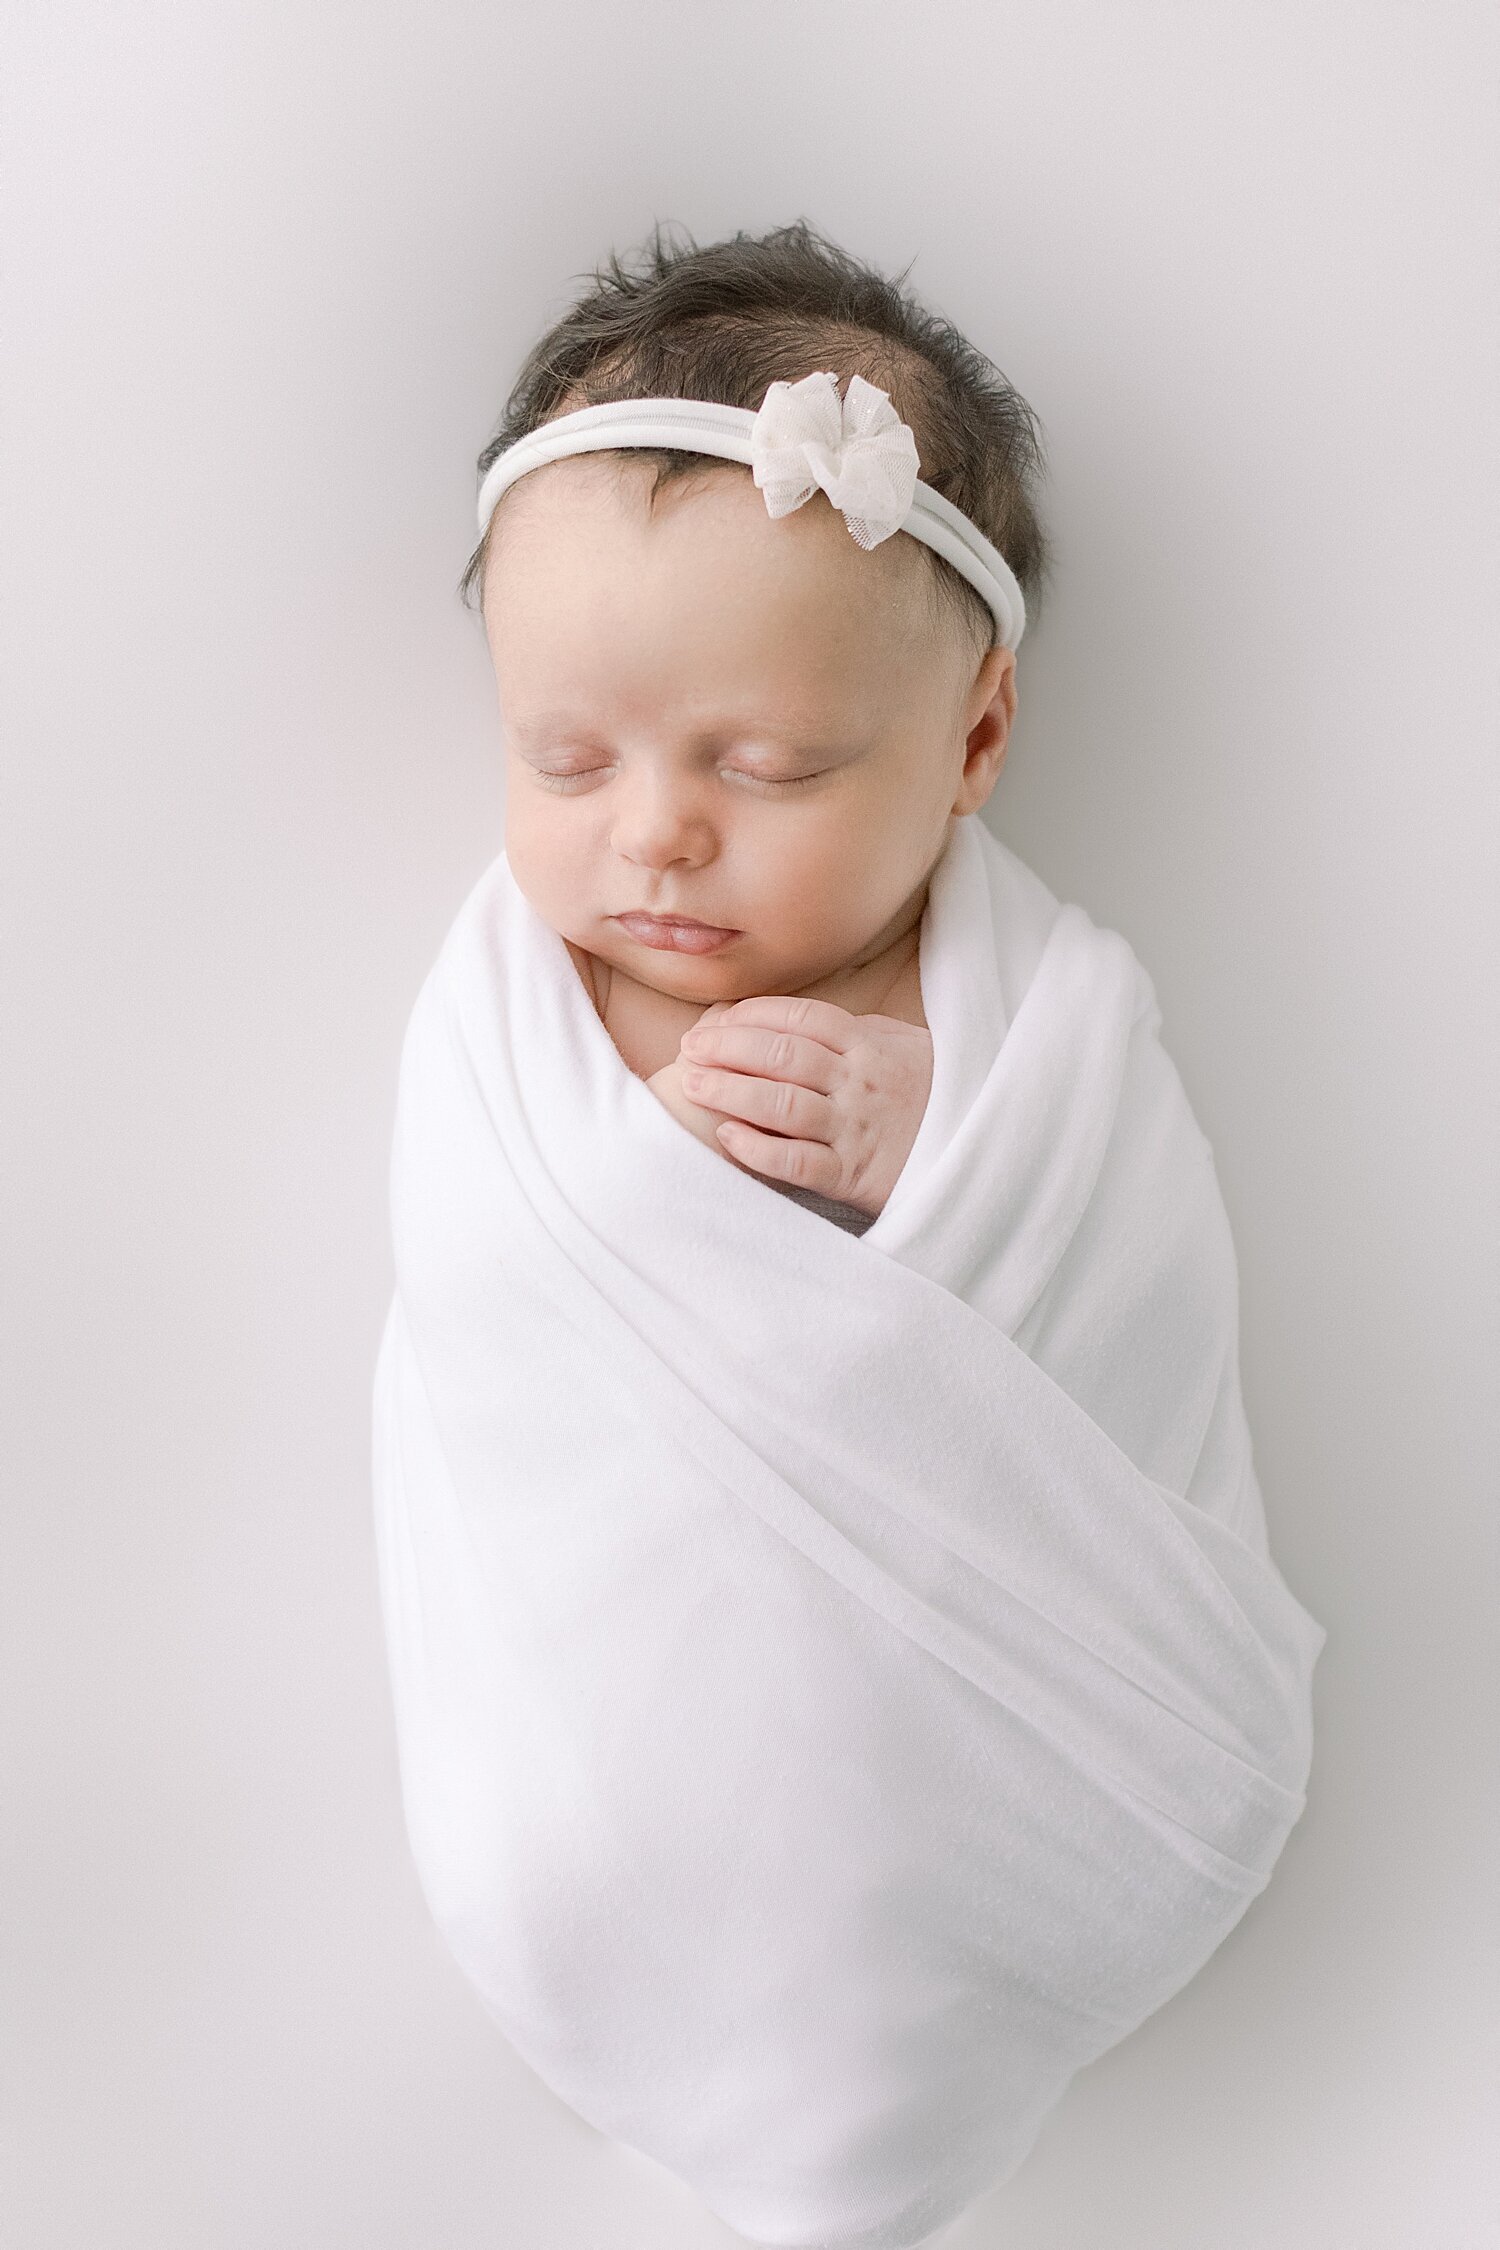 Baby girl swaddled in white with a white headband. Photo by Ambre Williams Photography.